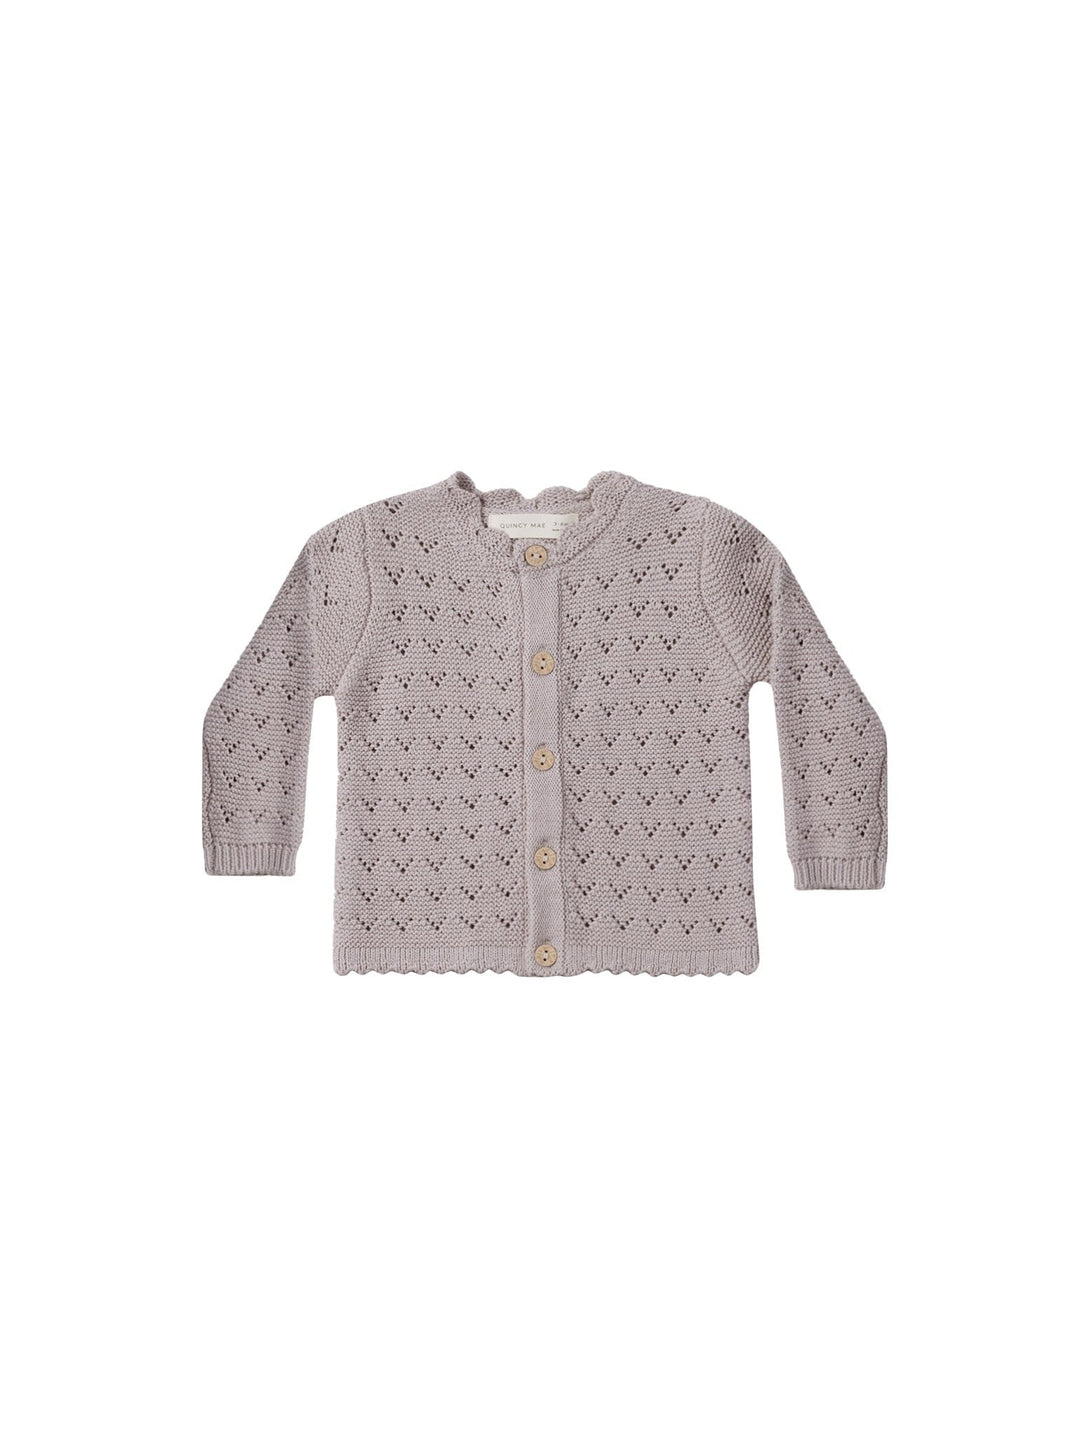 Quincy Mae Sweater 0-3m Scalloped Cardigan - Lavender